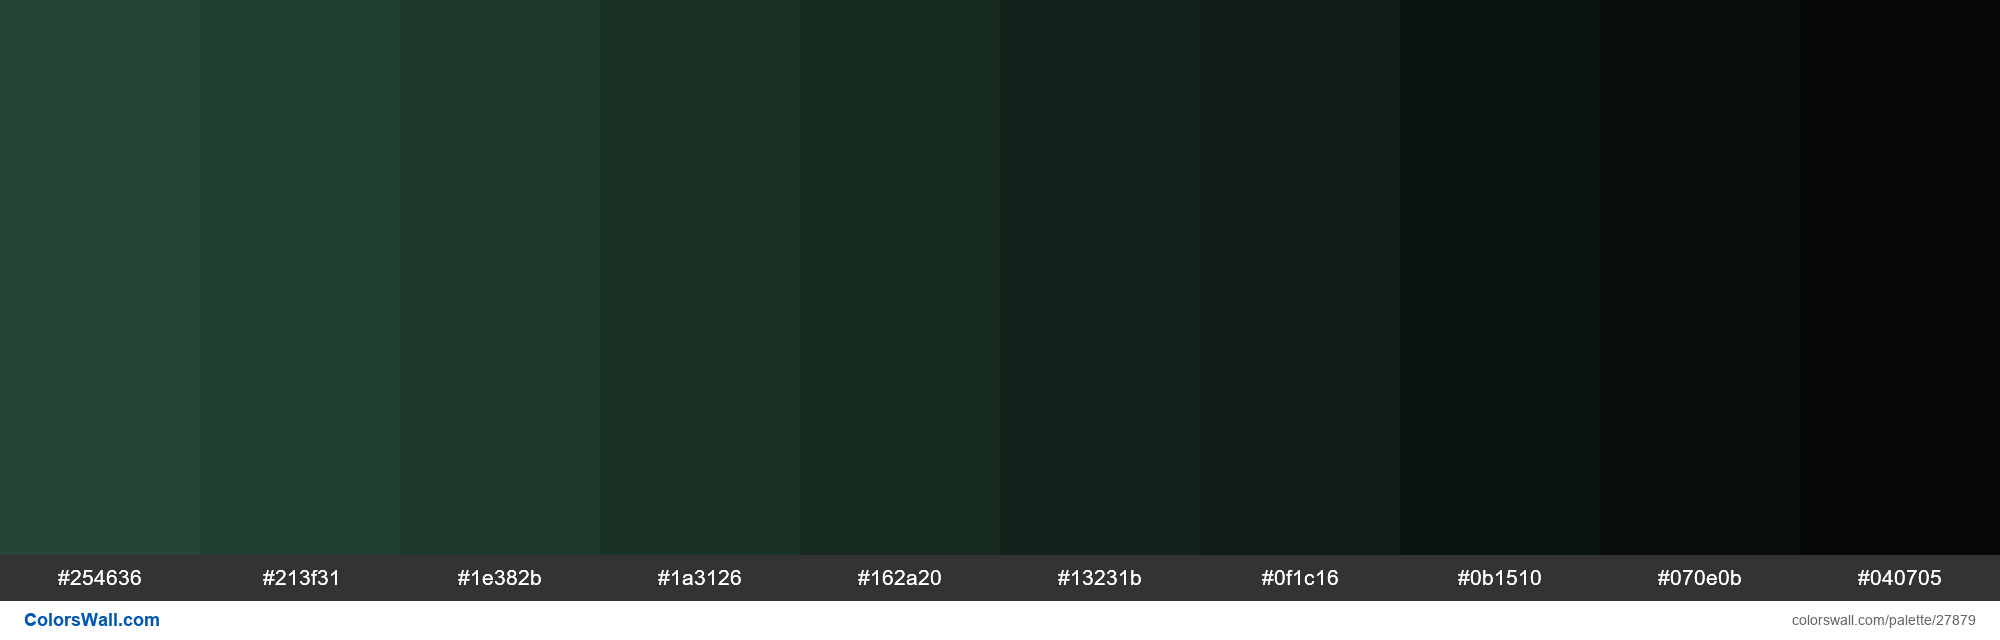 https://colorswall.com/images/palettes/shades-of-bottle-green-color-254636-hex-27879-colorswall.png